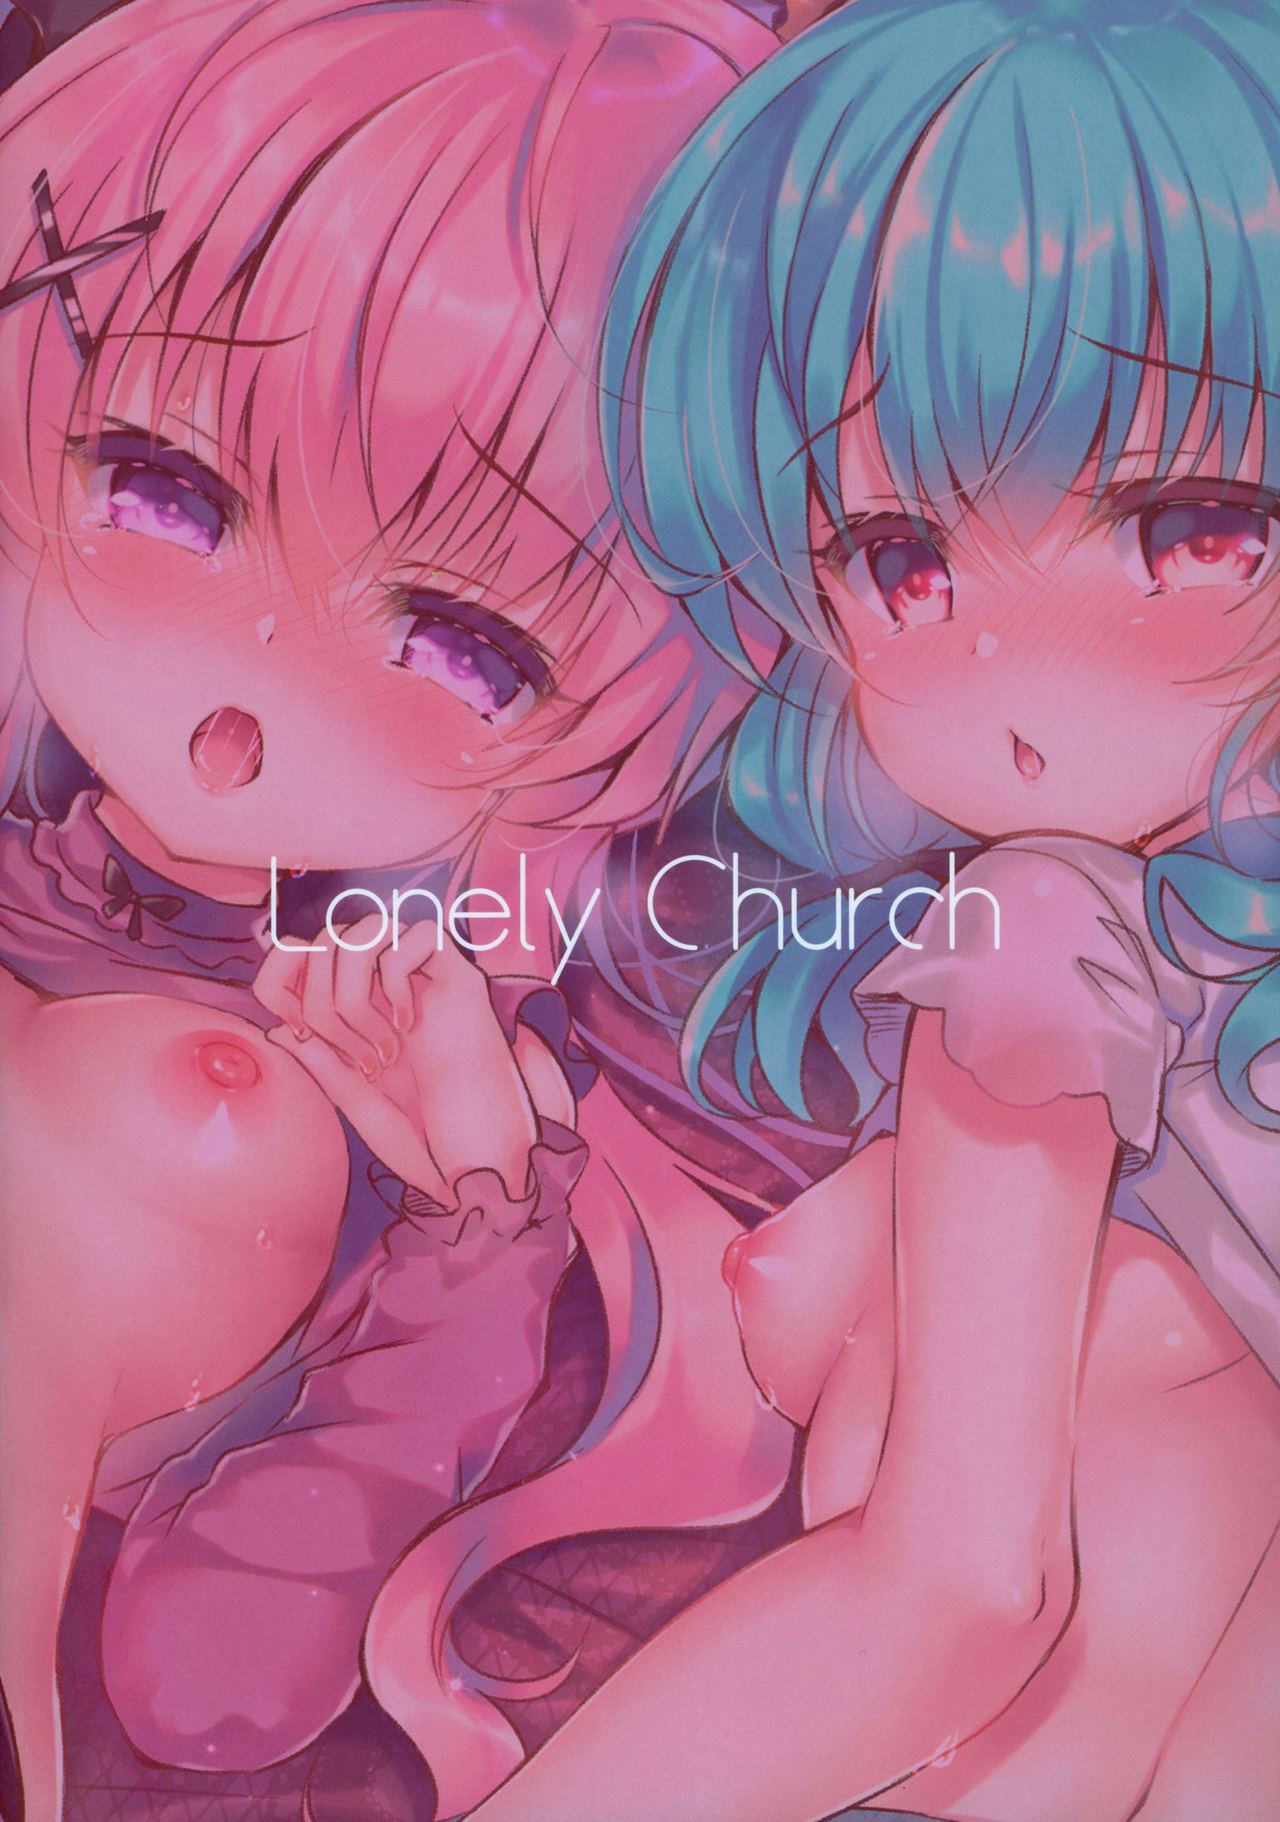 (COMIC1☆15) [Lonely Church (鈴音れな)] Chocola a mer